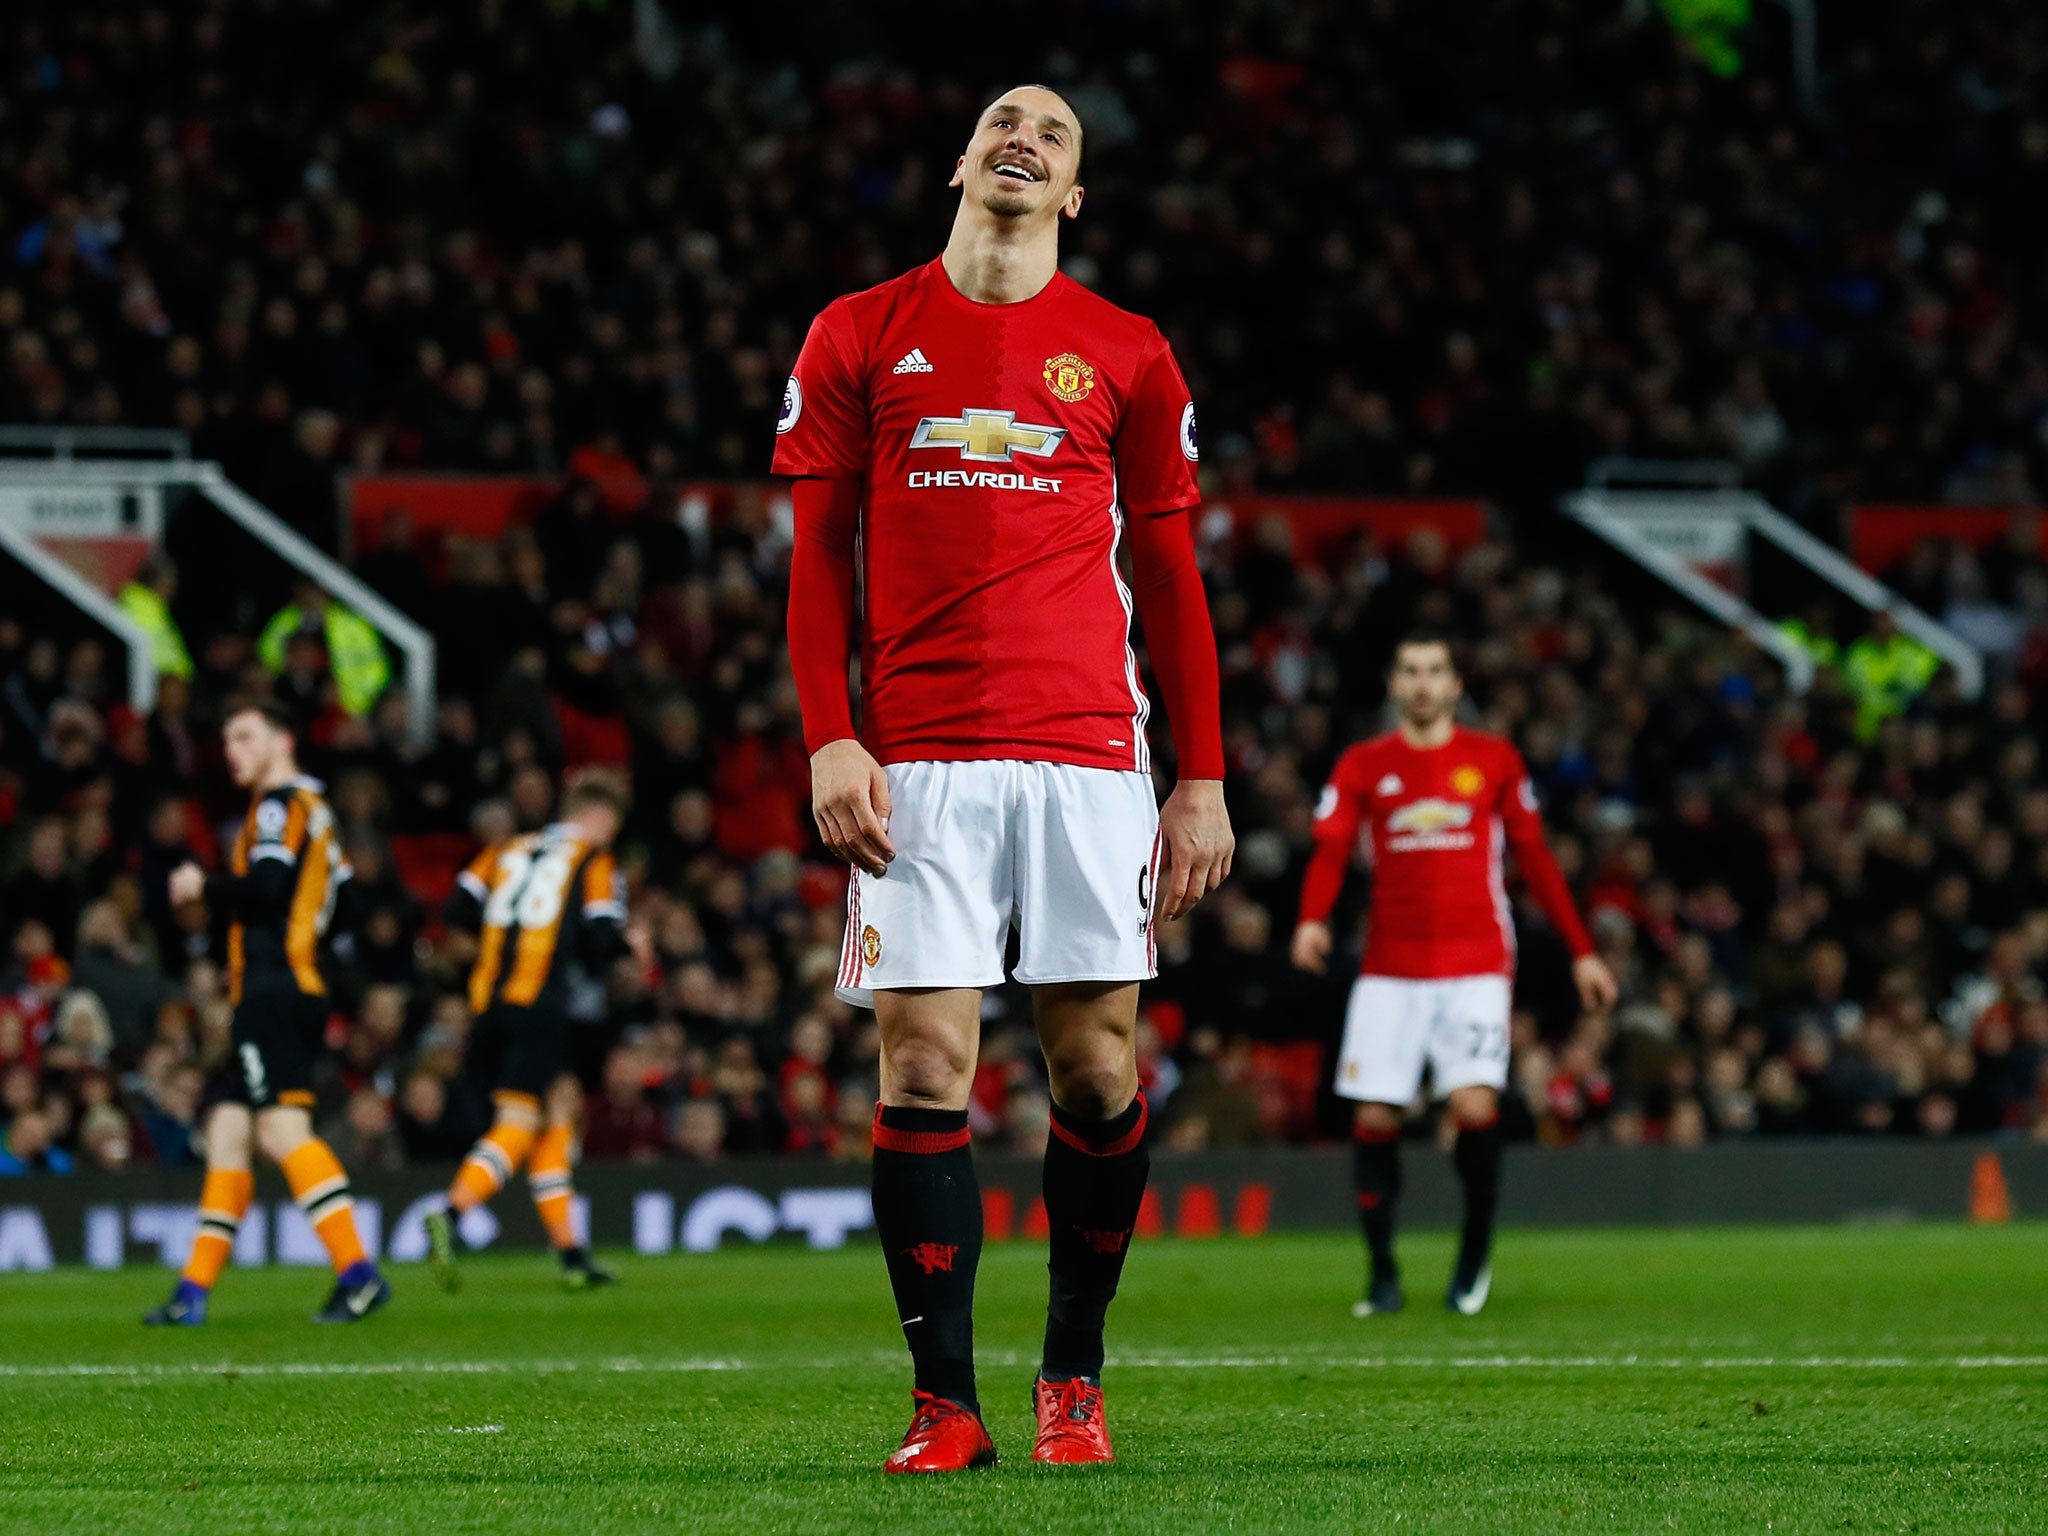 Zlatan Ibrahimovic was unable to provide United with a winning goal